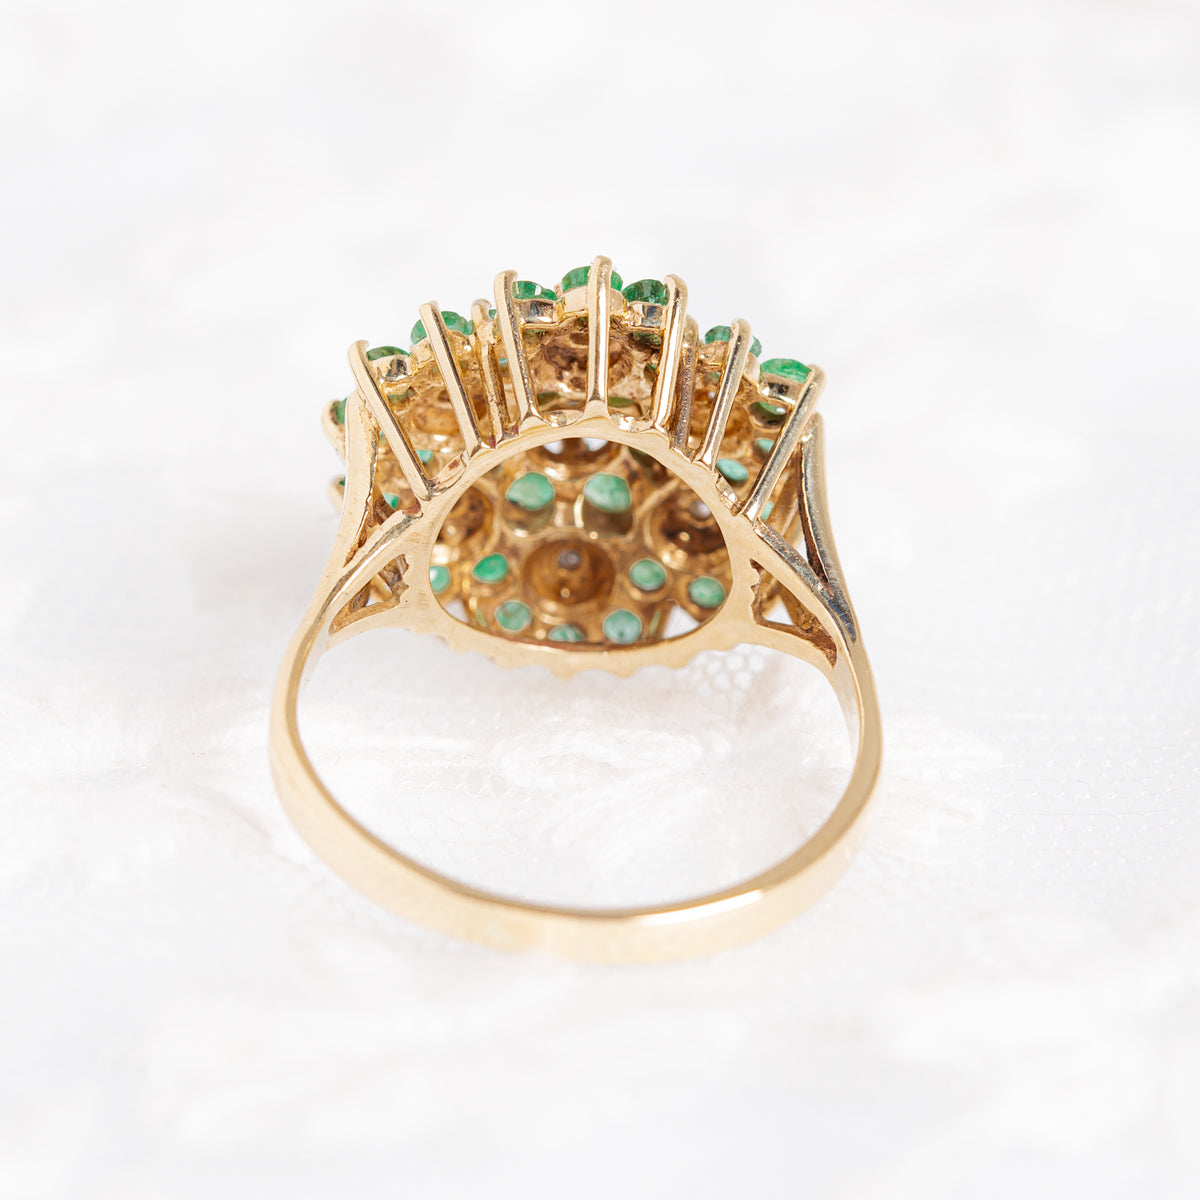 9ct Gold Emerald & Diamond Ring Large Cocktail Cluster Vintage 9K 1990's (A1384)